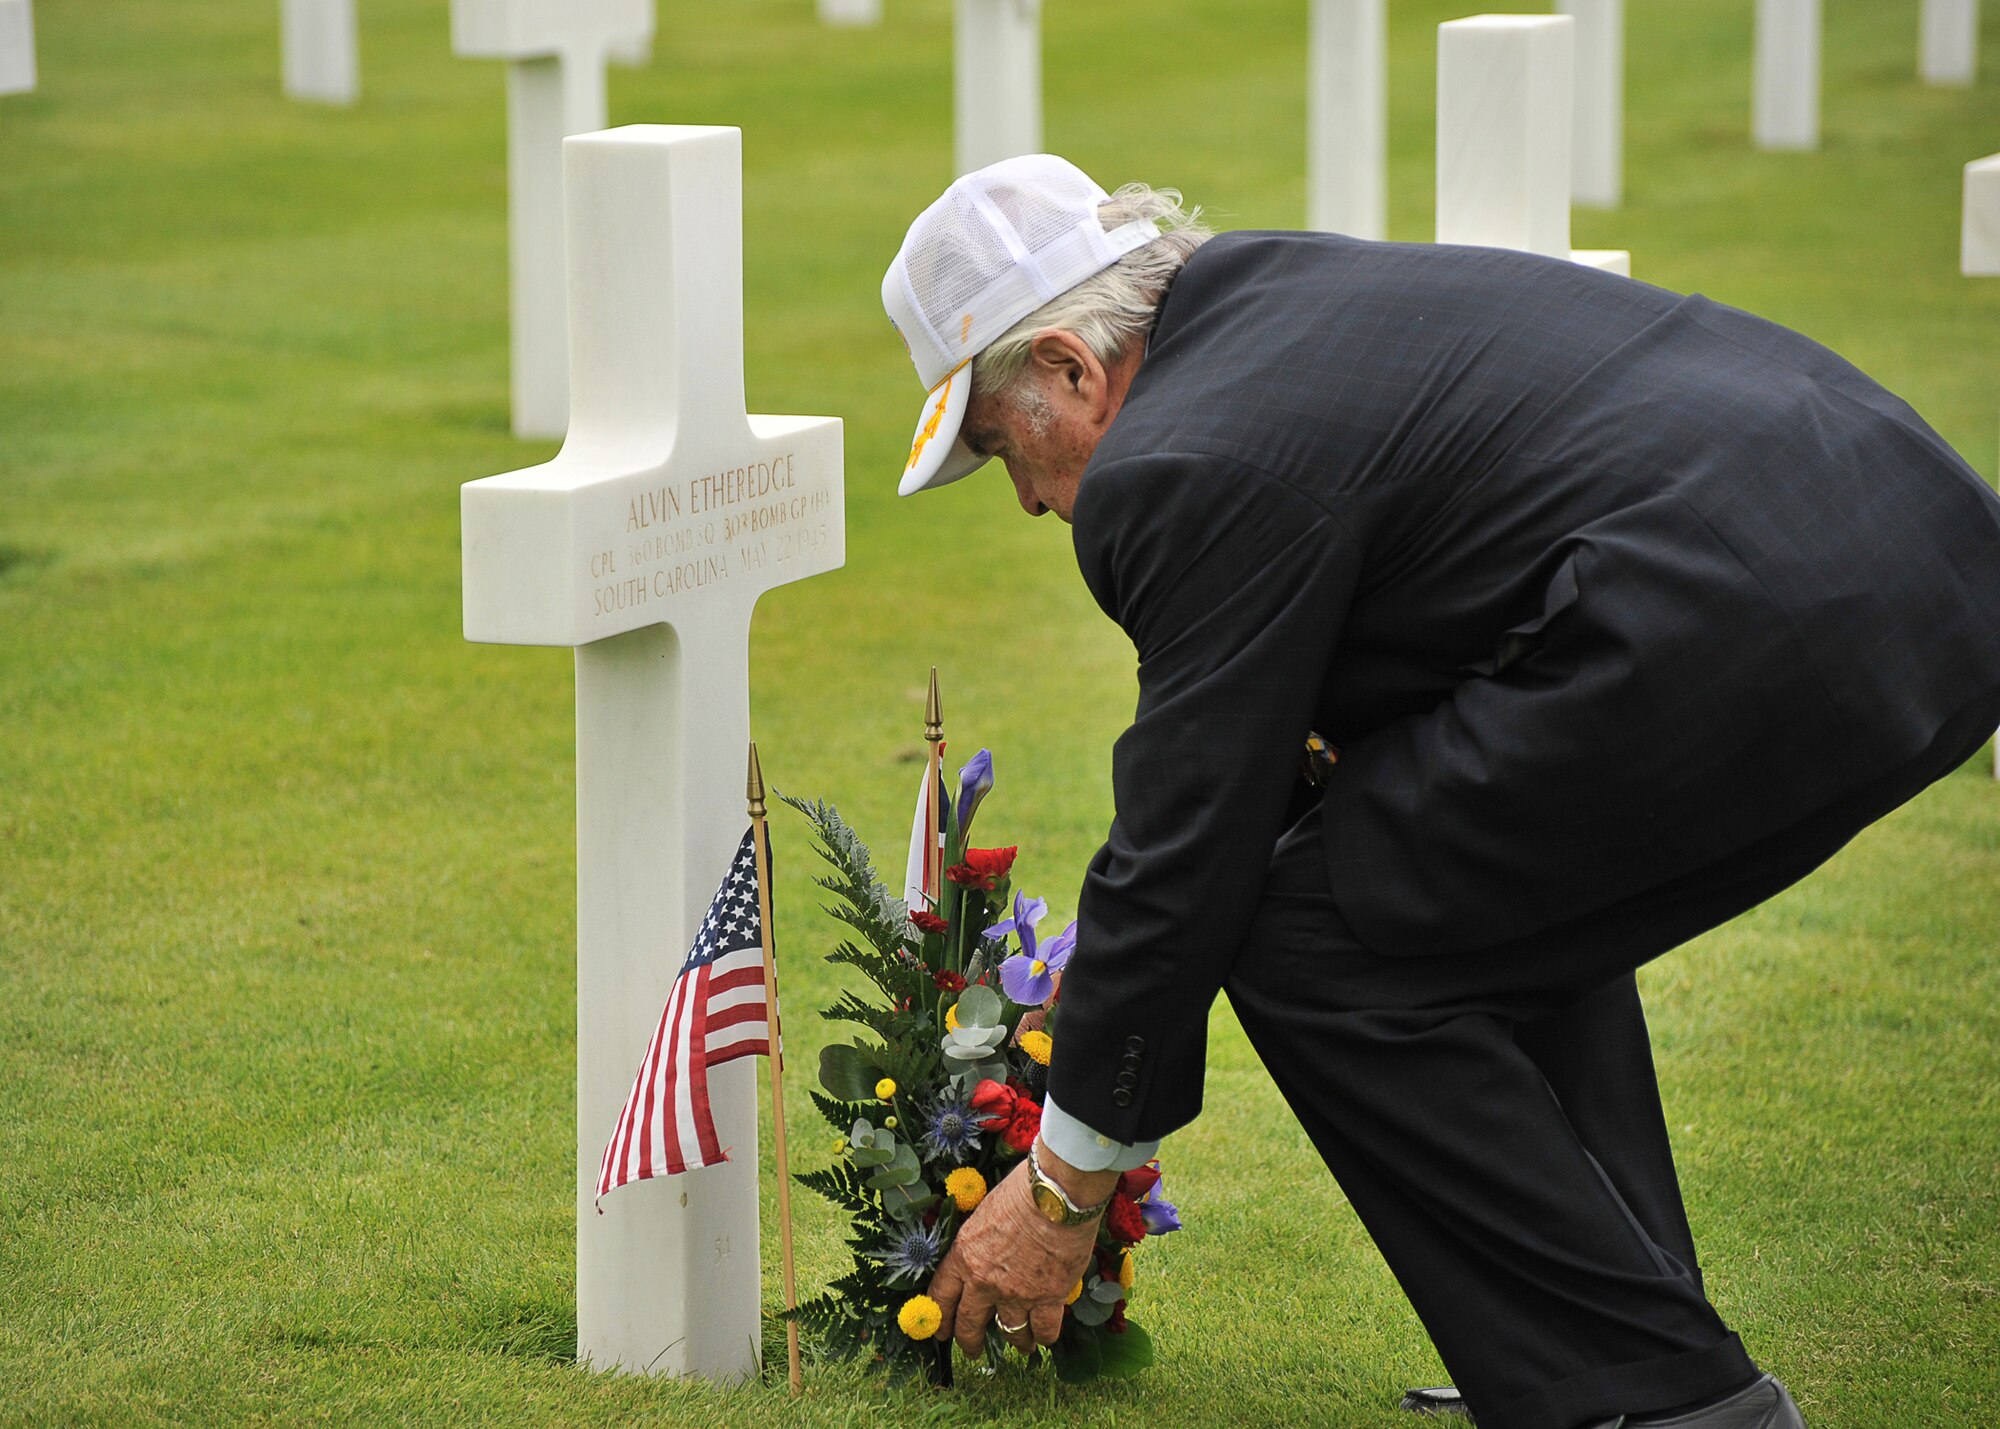 303rd Bomb Group veteran Eddie Deerfield lays a floral spray at the grave of his crewman right waist gunner Cpl.  Alvin Etheredge.  Etheredge was removed from flight status in August 1943 after flying 13 missions and served on the MSgt Robert B. Heiliger ground crew until he died from a tumor in May 1945 (U.S. Air Force photo by Staff Sgt. Javier Cruz)